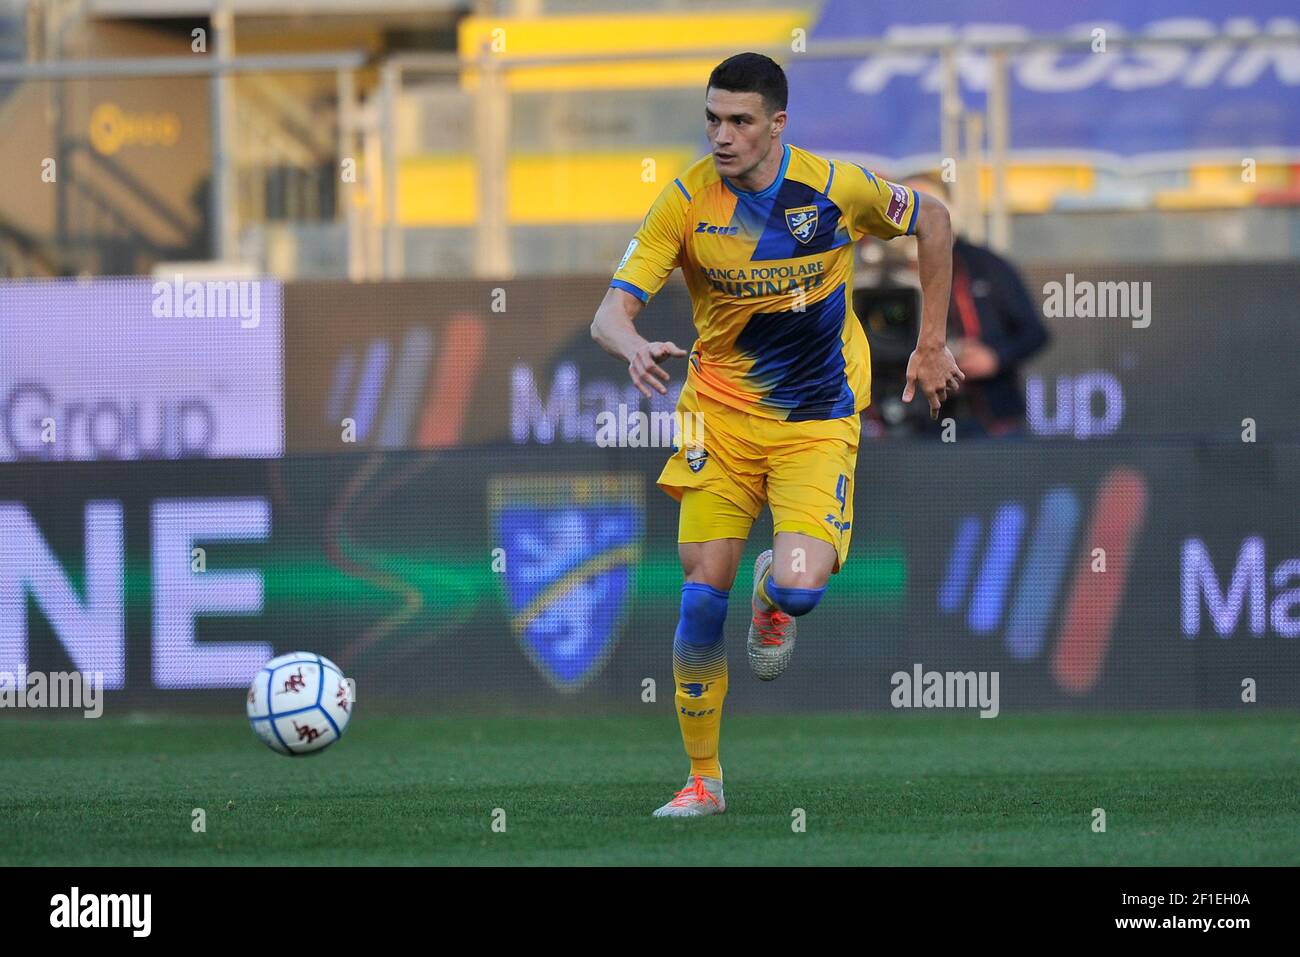 MArcos Curado player of Frosinone, during the match of the Italian Serie B championship, between Frosinon vs Monza, final result 2-2, match played at Stock Photo